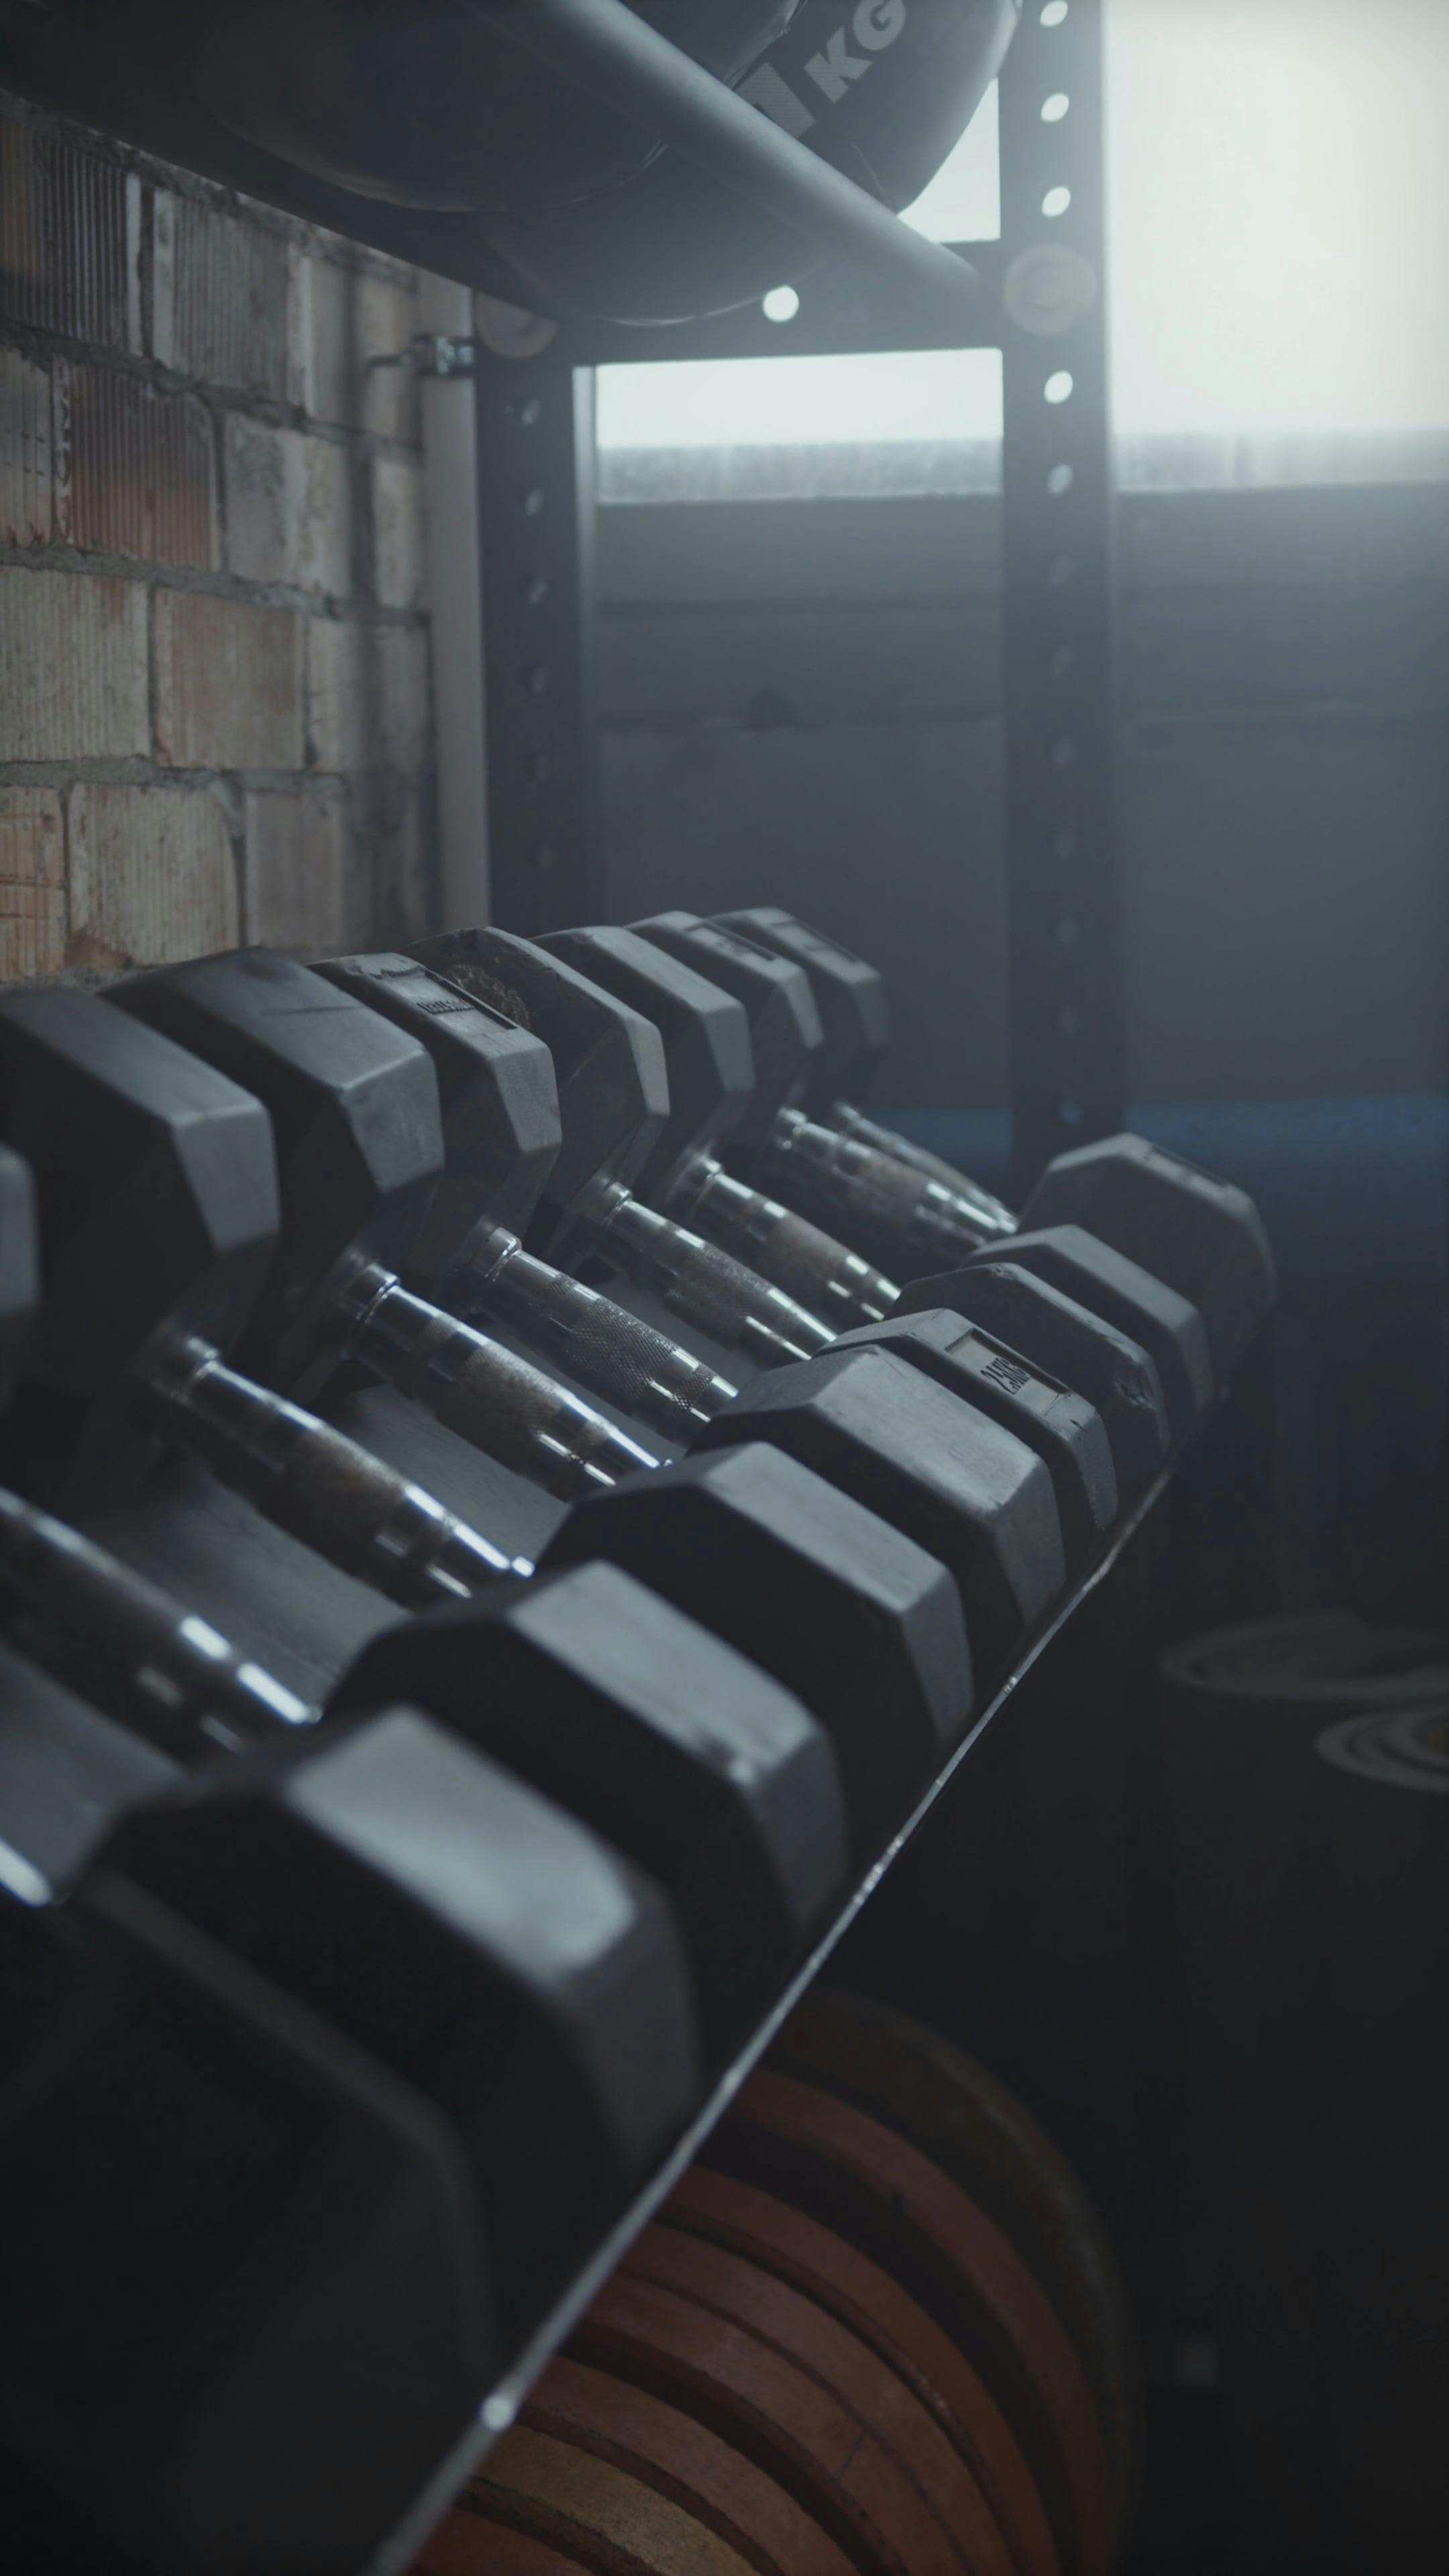 Weight plates and Dumbbells in a Gym · Free Stock Video